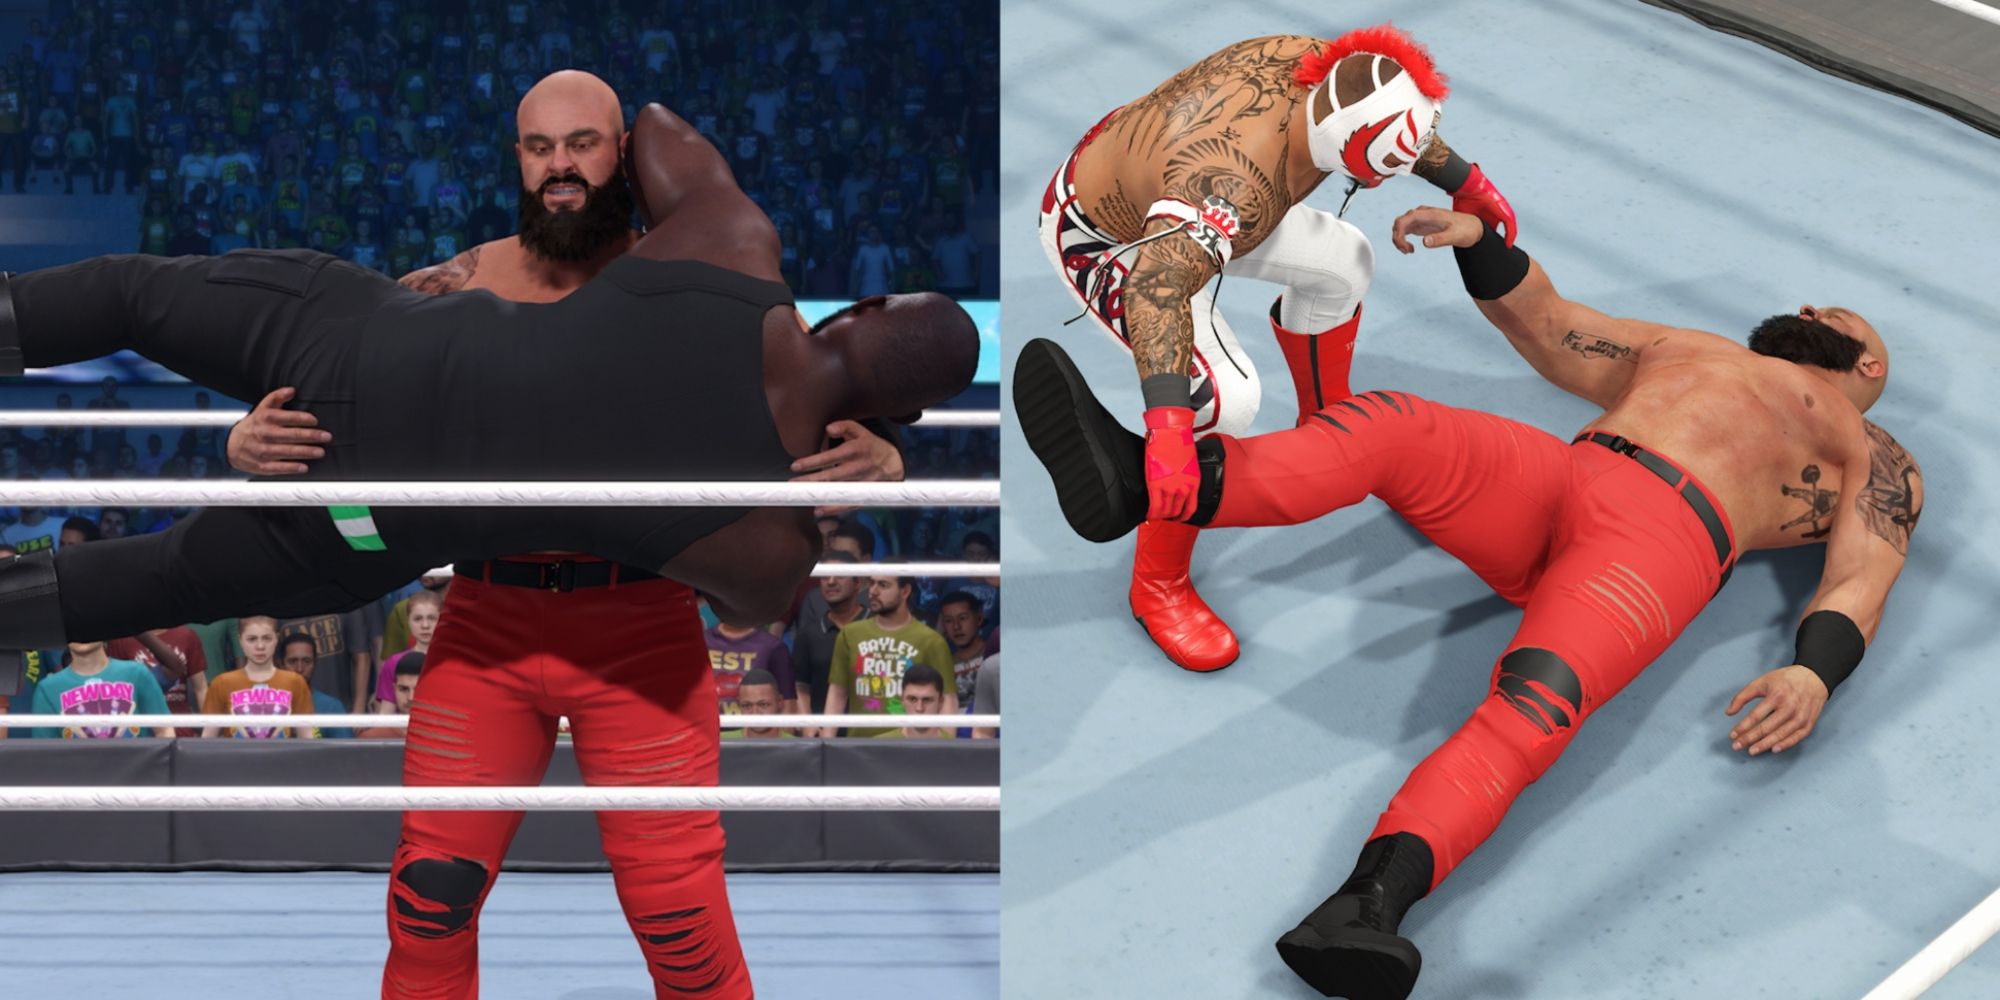 WWE 2K23 How To Control Your Opponent Featured Split Image Strowman Carrying Omos and Rey Mysterio Draging Strowman